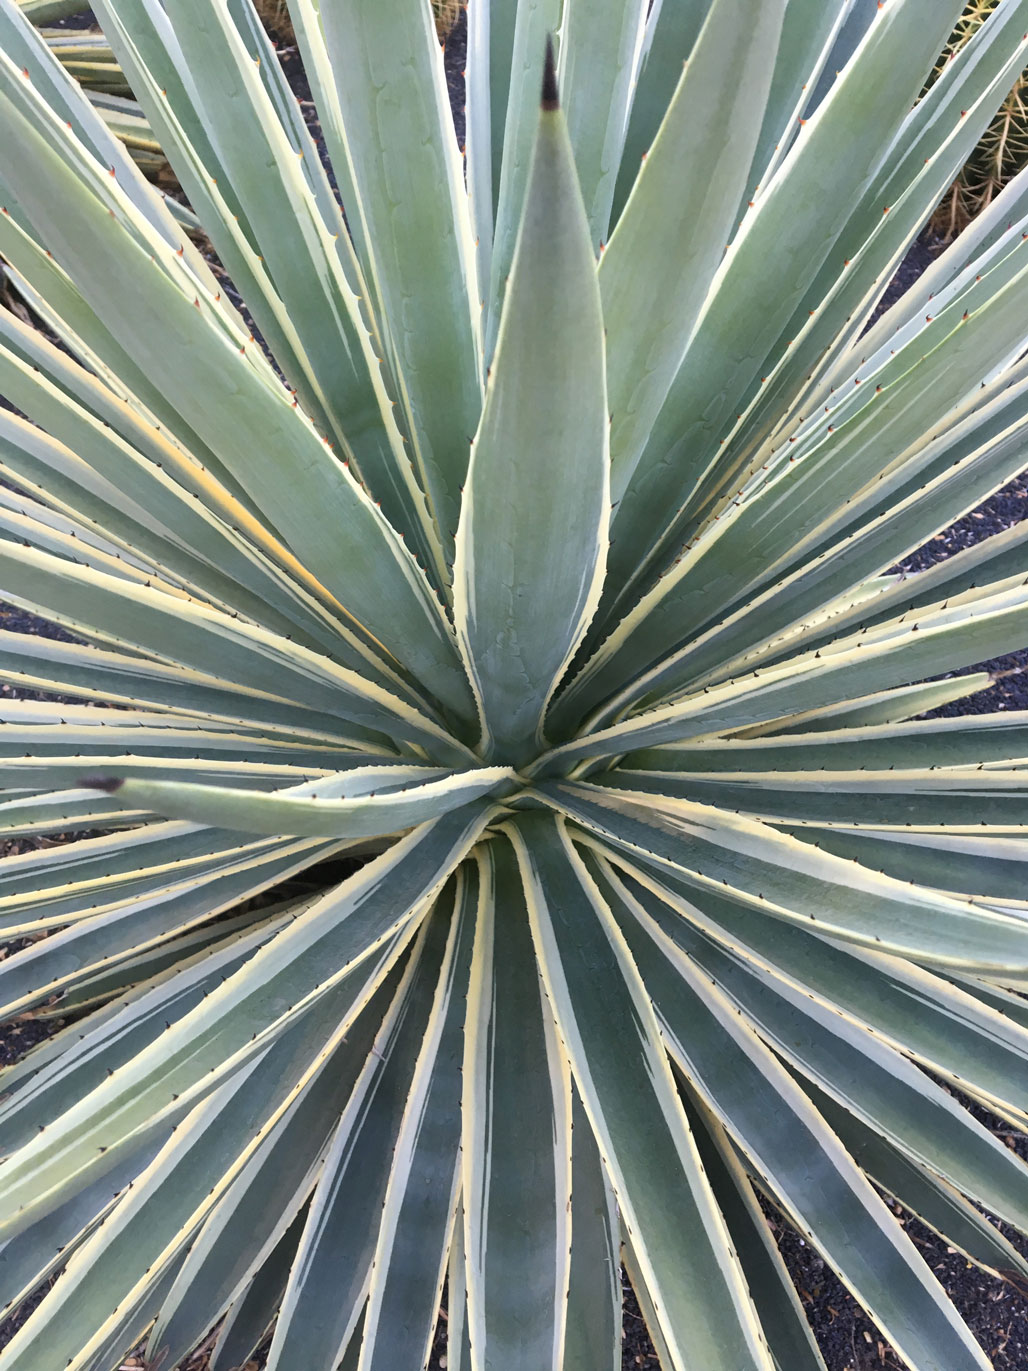 A close-up of the leaves of the Caribbean Agave.